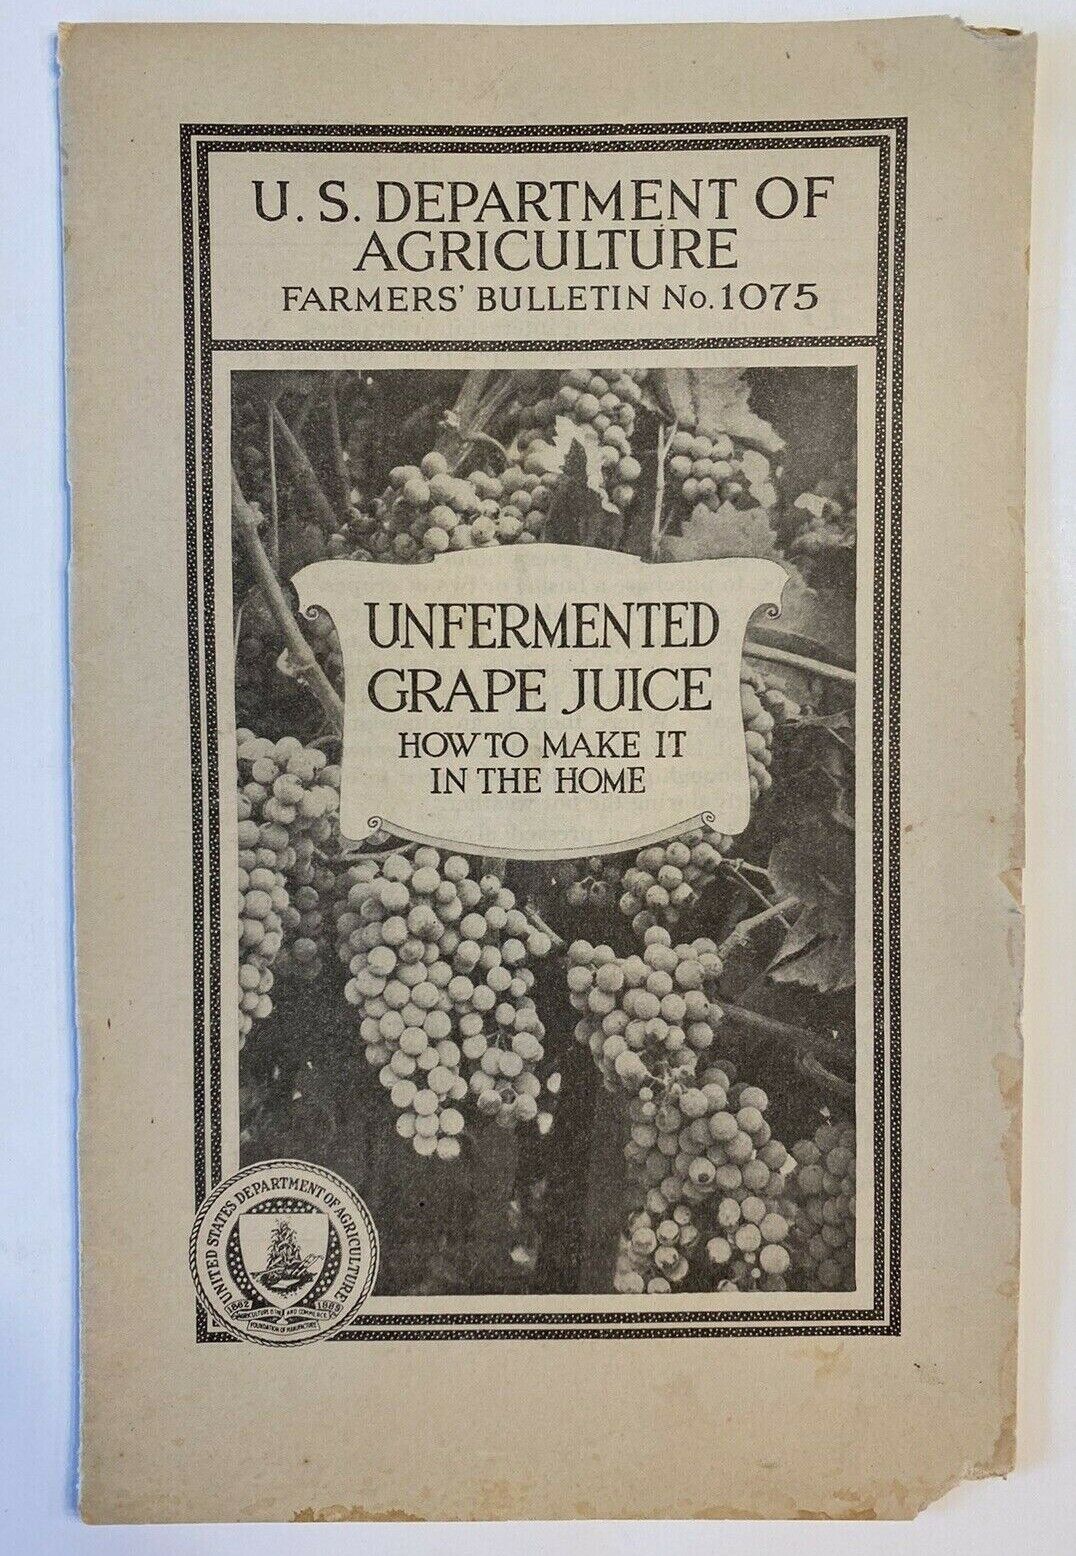 Unfermented Grape Juice And How To Make It At Home USDA Farmers Bulletin 1075